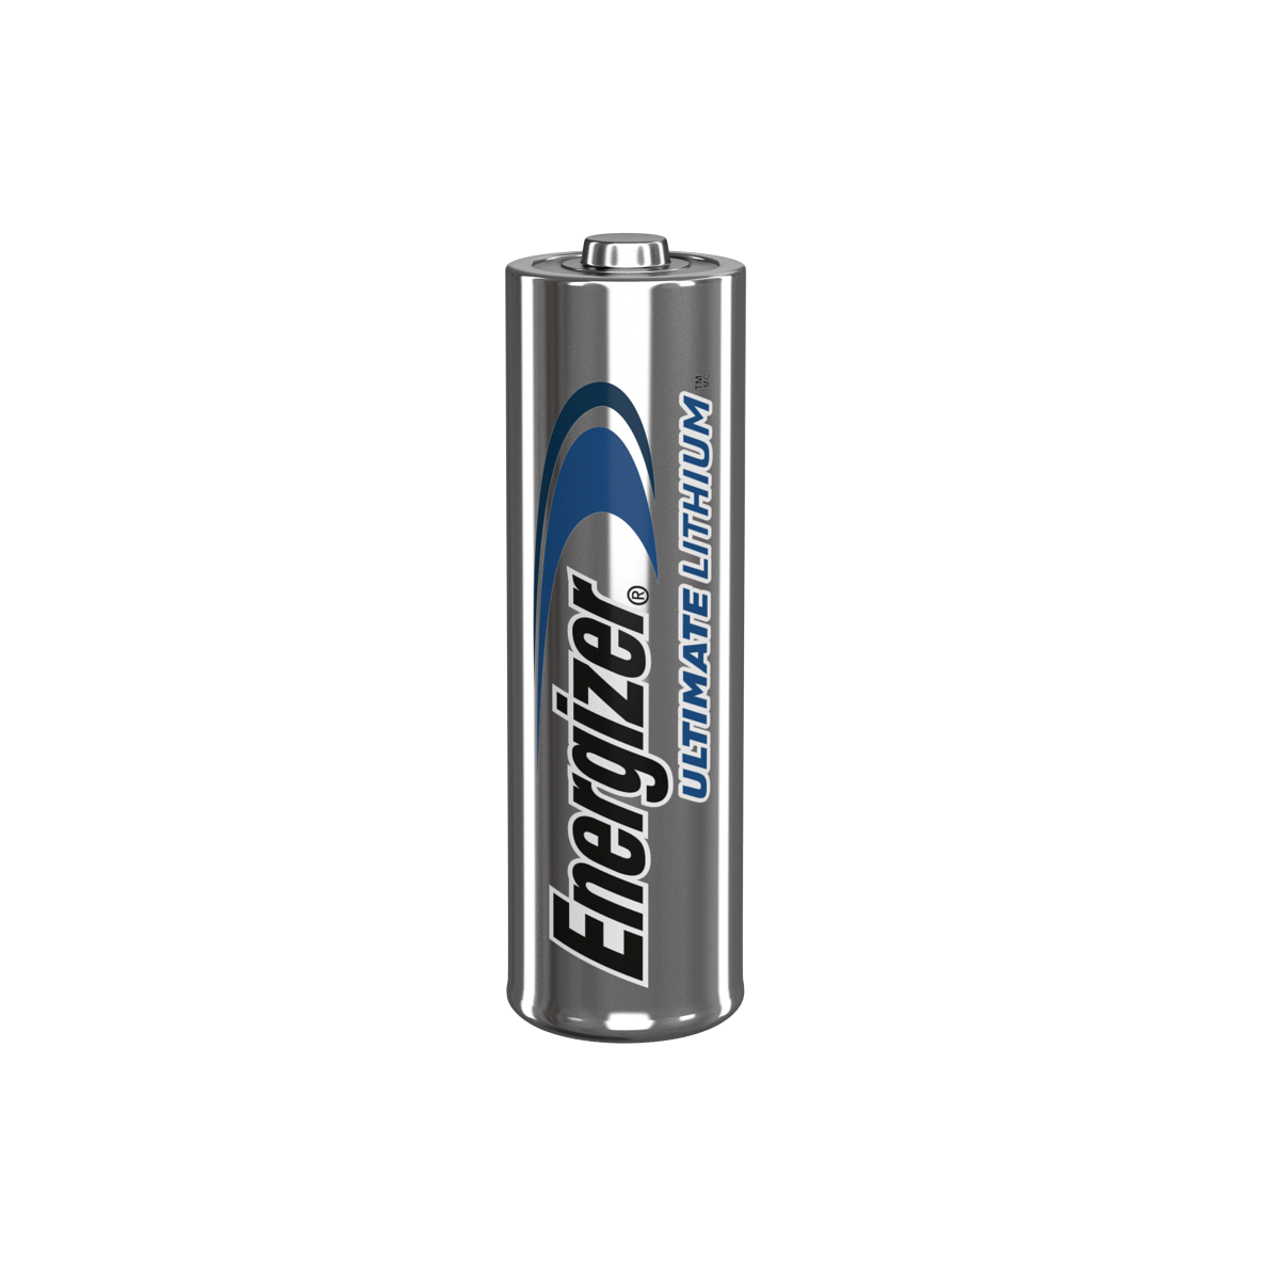 Energizer Ultimate Lithium AA Battery Review - Consumer Reports